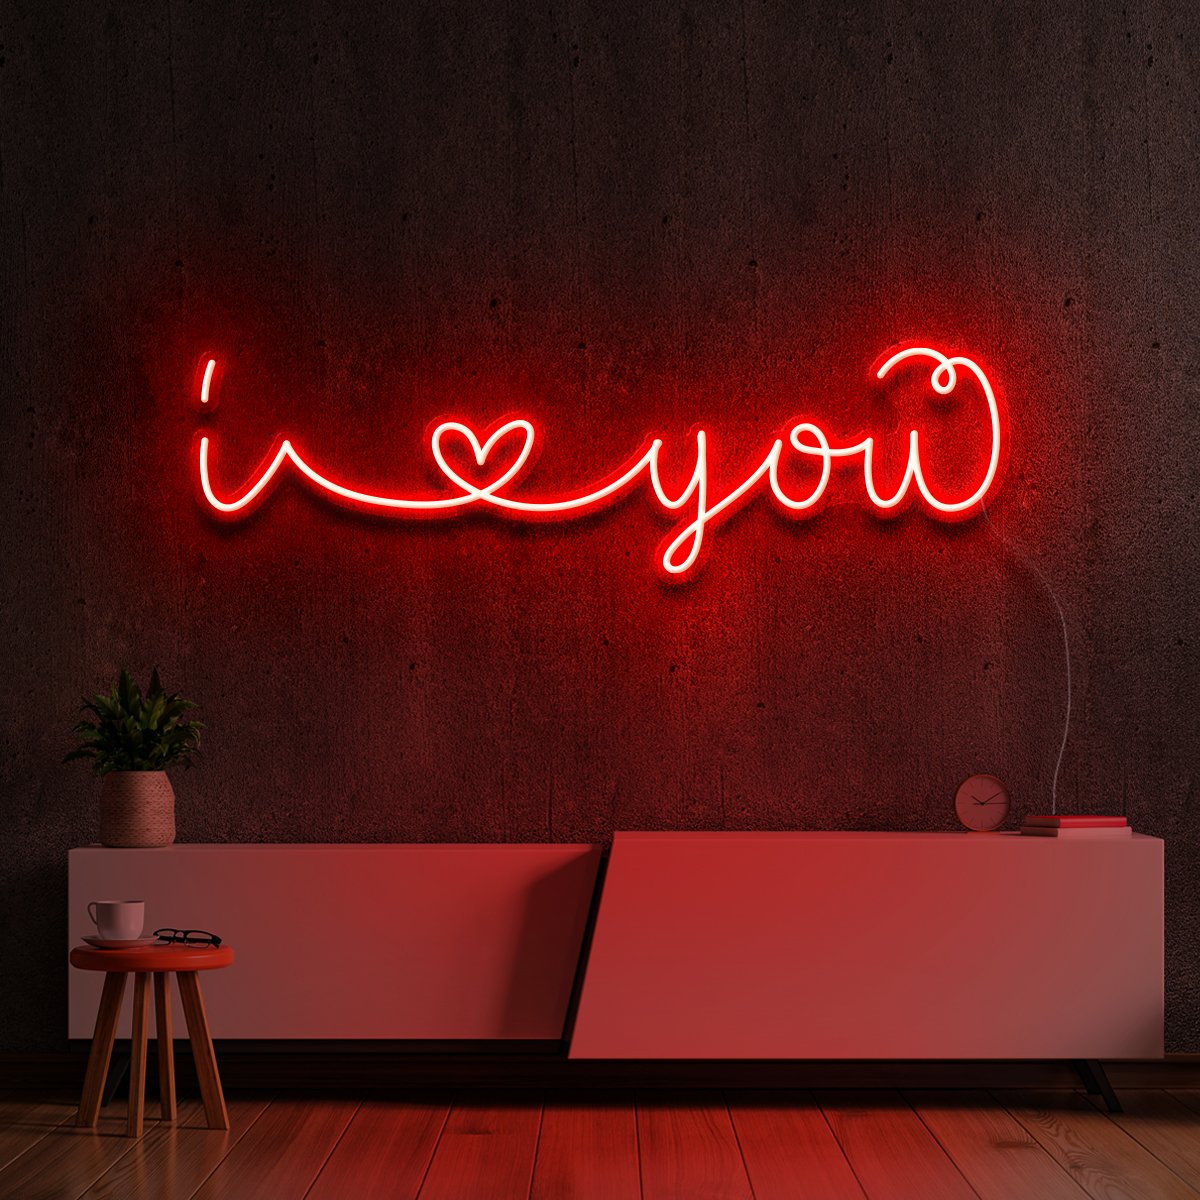 "I Love You" Neon Sign 60cm (2ft) / Red / LED Neon by Neon Icons